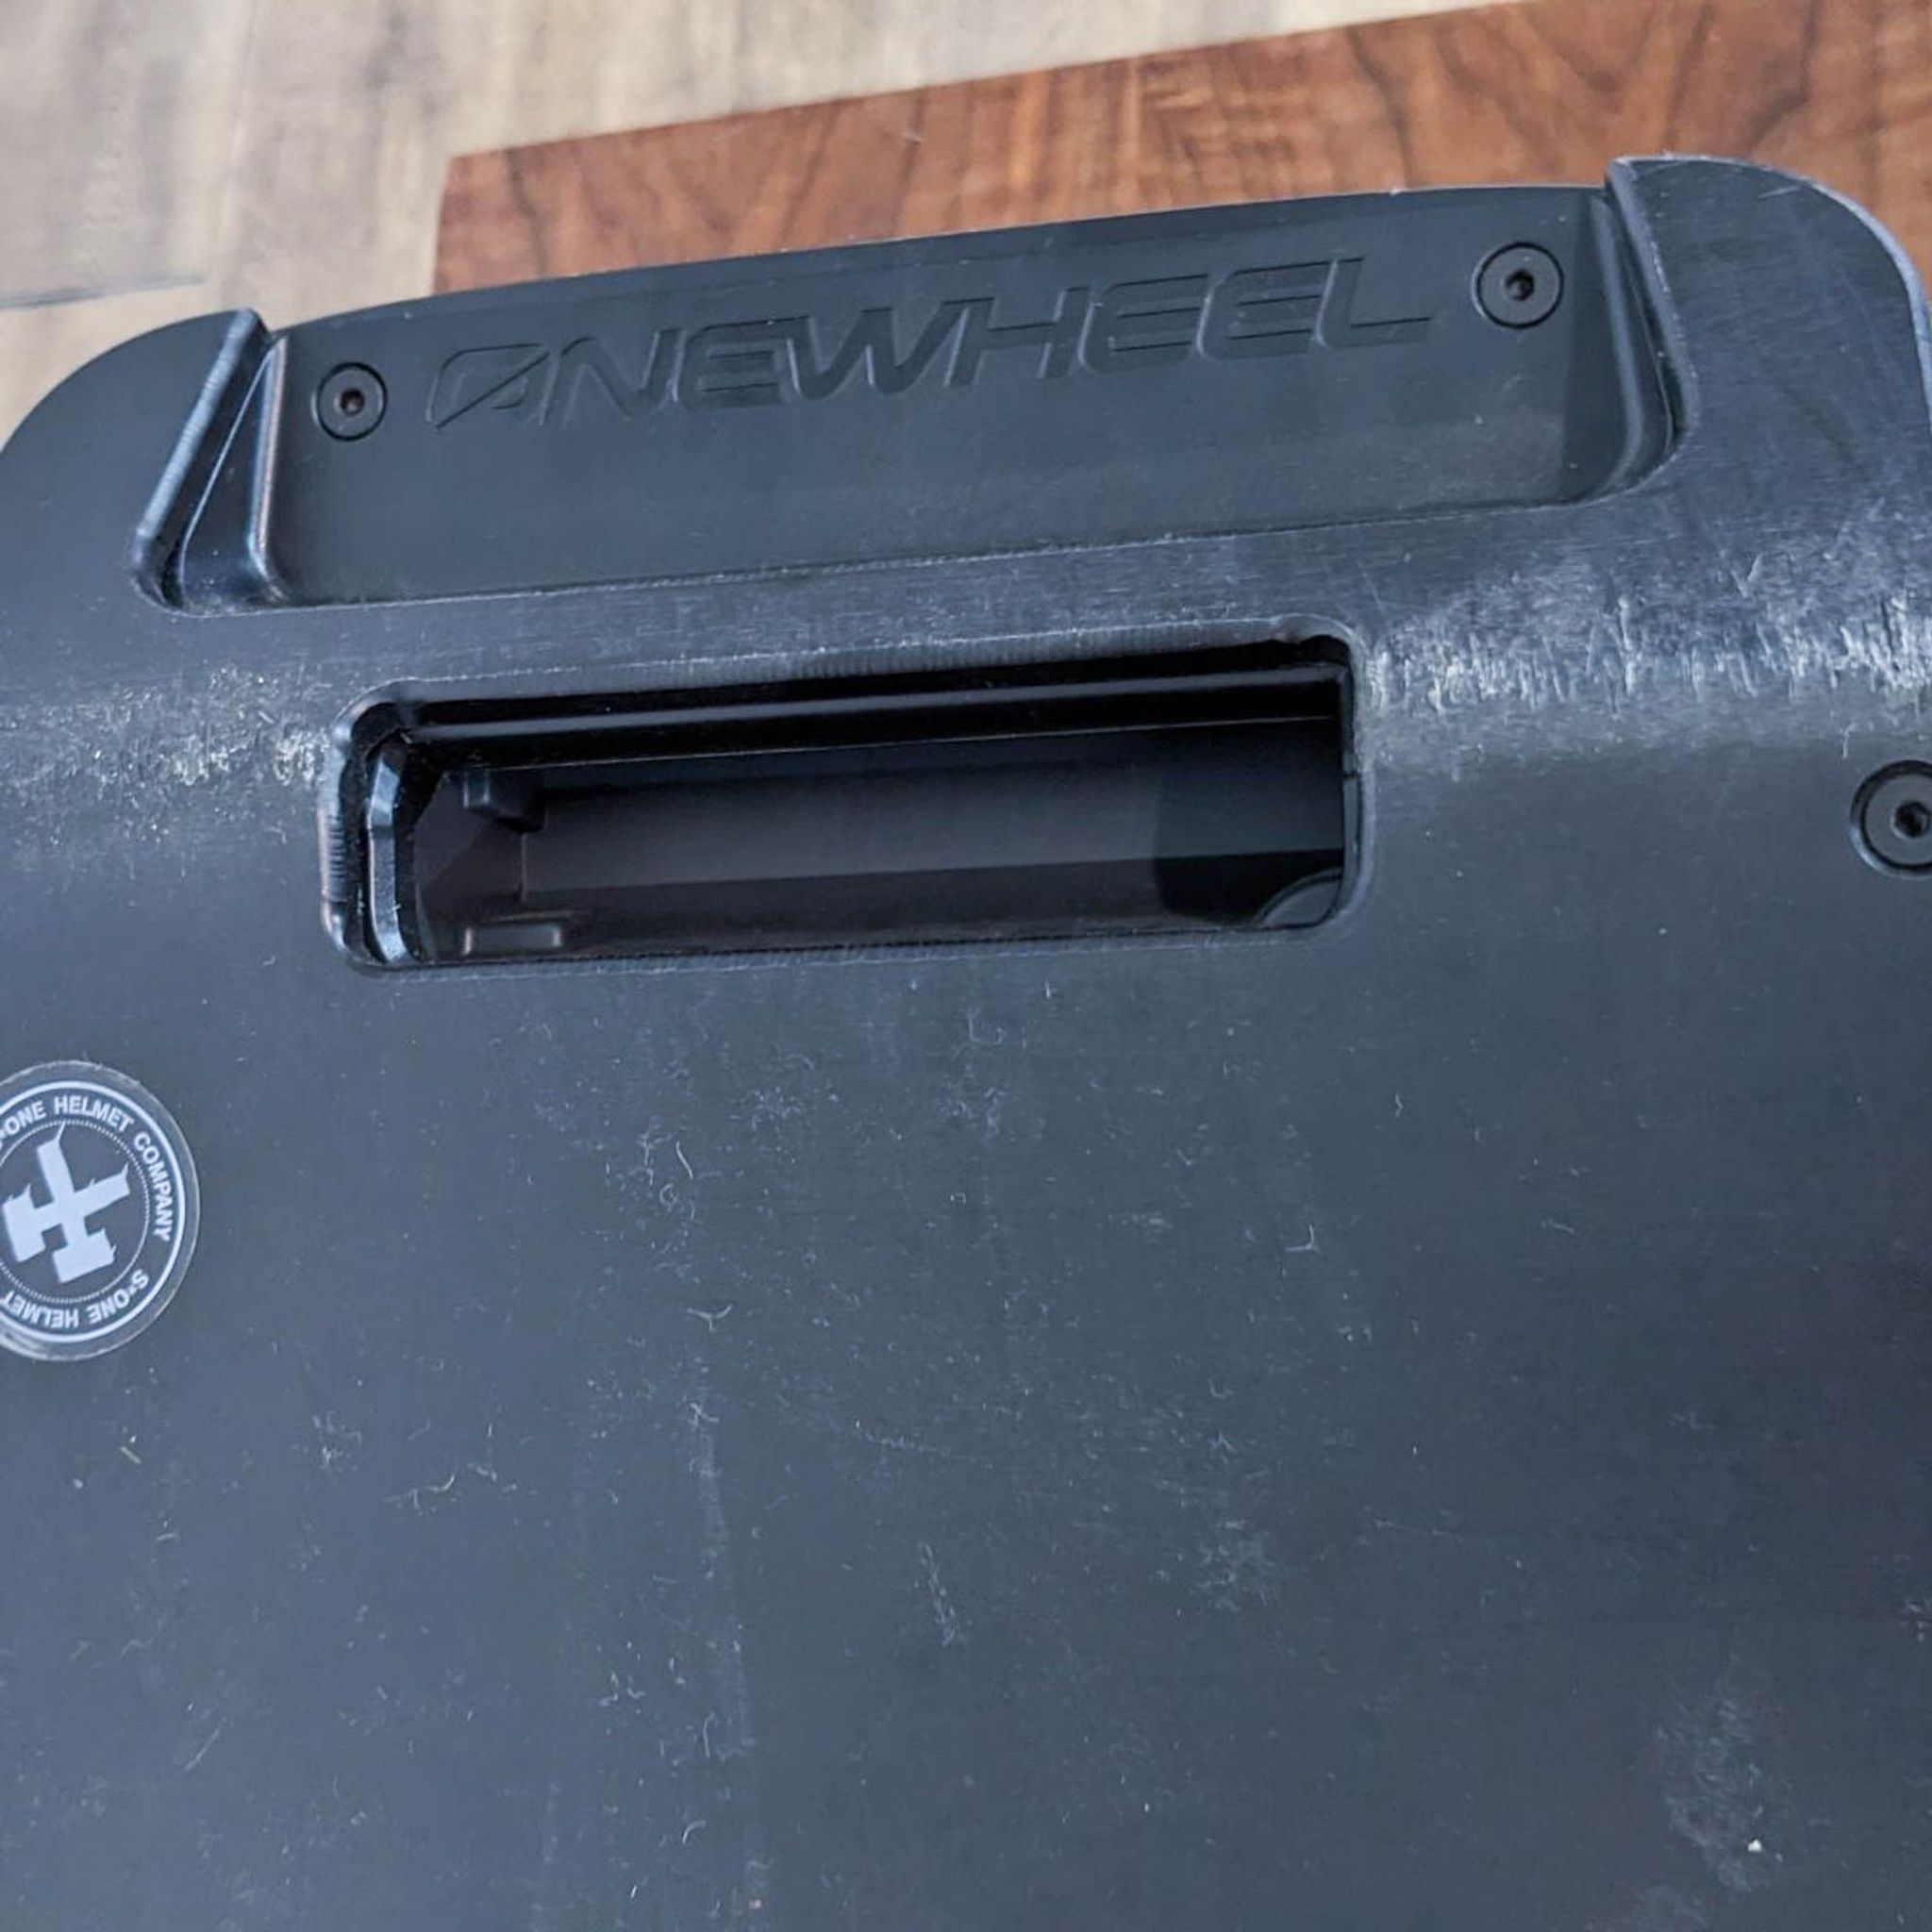 Rear view of an electric skateboard featuring the Onewheel logo and a handle slot on its black fender.